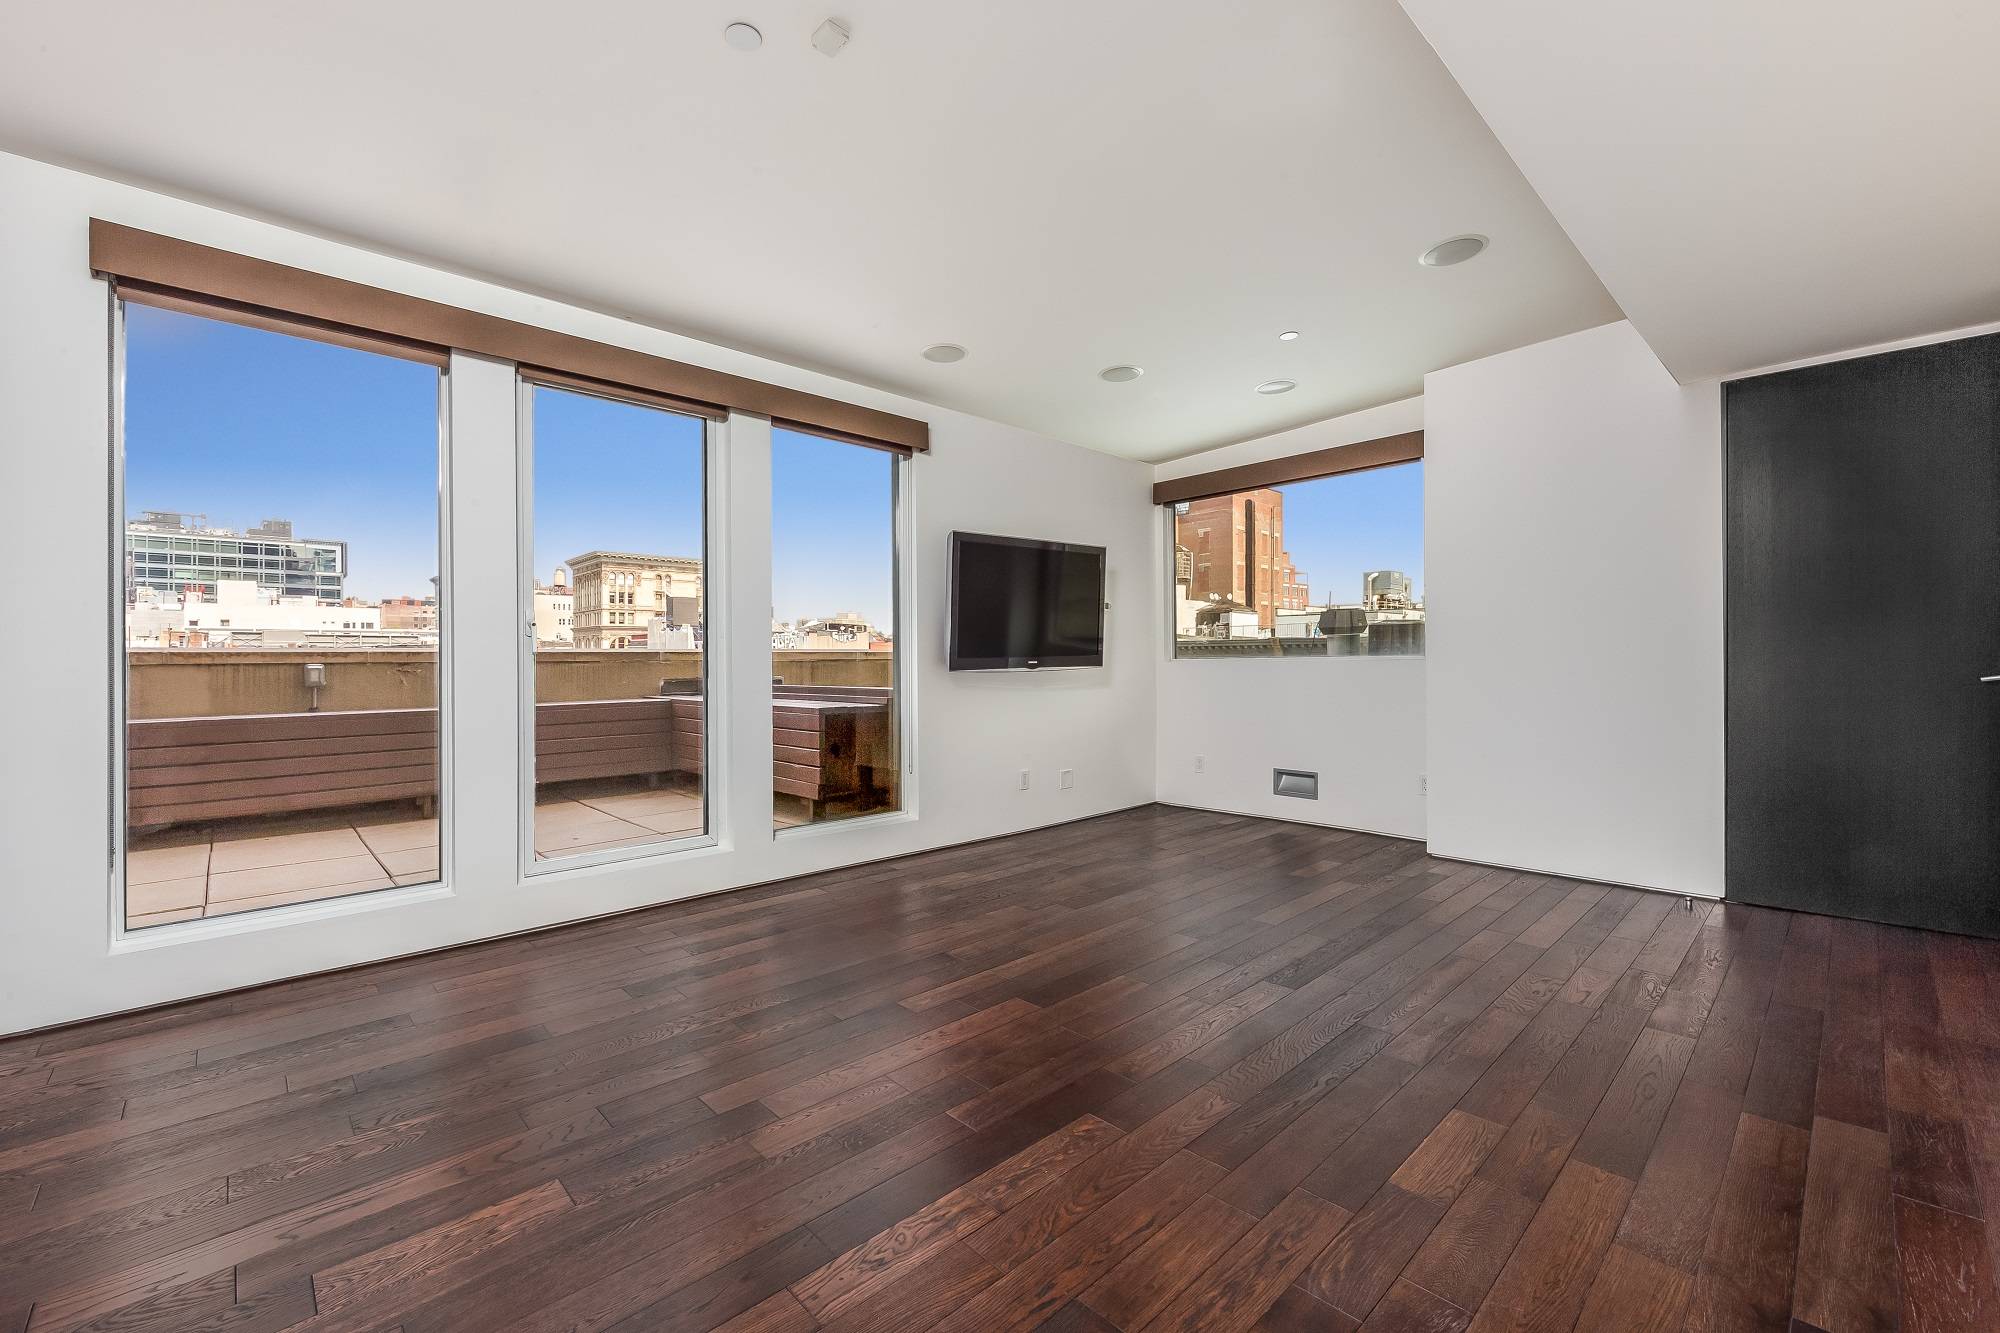 Incredible 4 Bedroom Tribeca Penthouse Triplex w/ Private Rooftop Available for Rent